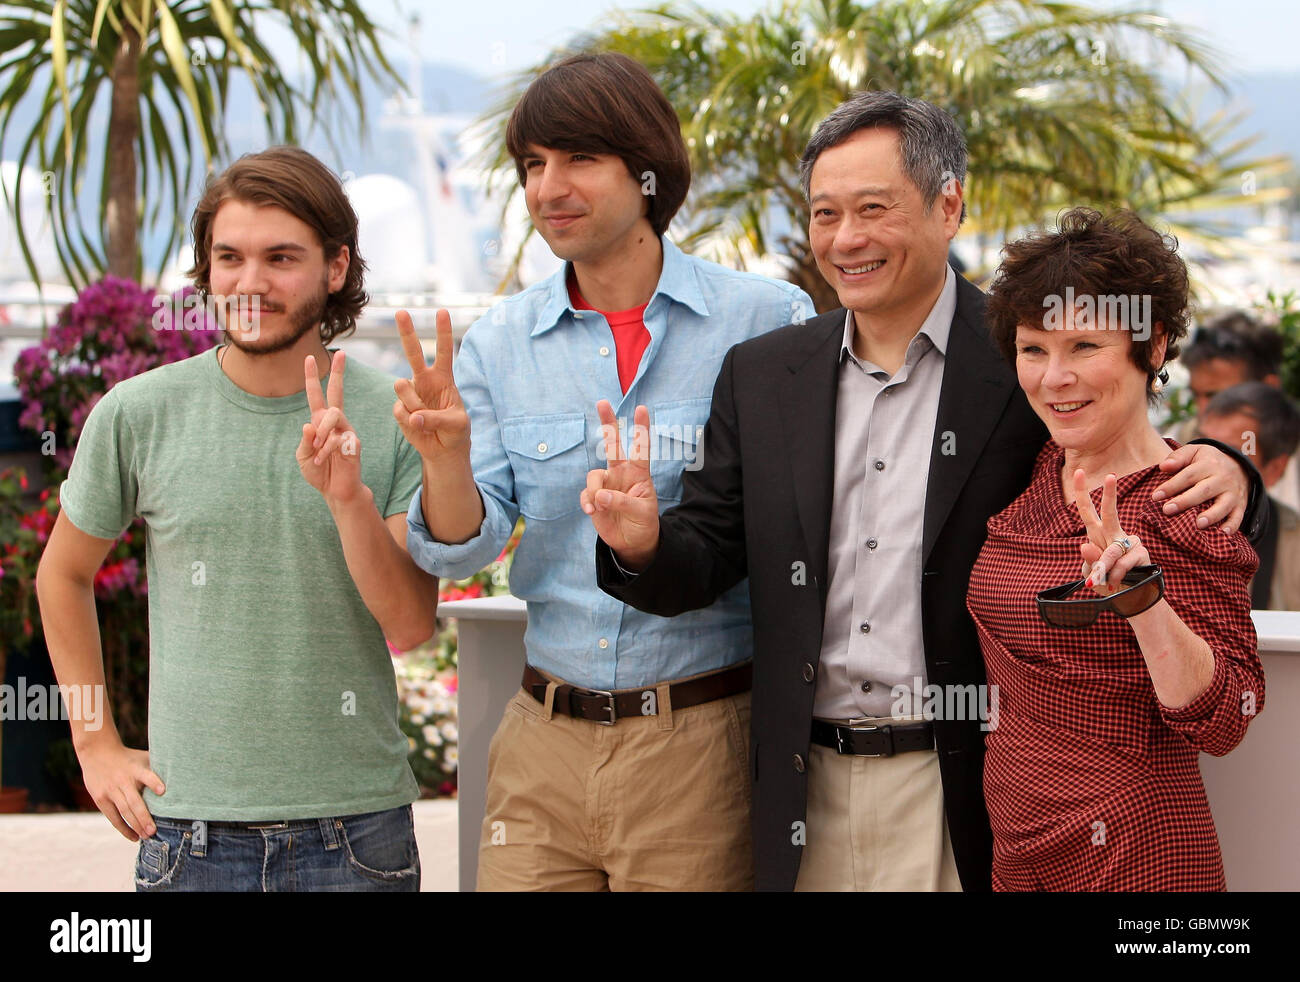 Director Ang Lee, second right, with the cast of the film 'Taking Woodstock' (from left) Emile Hirsch, Demetri Martin, and Imelda Staunton, at a photocall at the Palais des Festivals, in Cannes, France, as part of the 62nd annual Cannes Film Festival Stock Photo